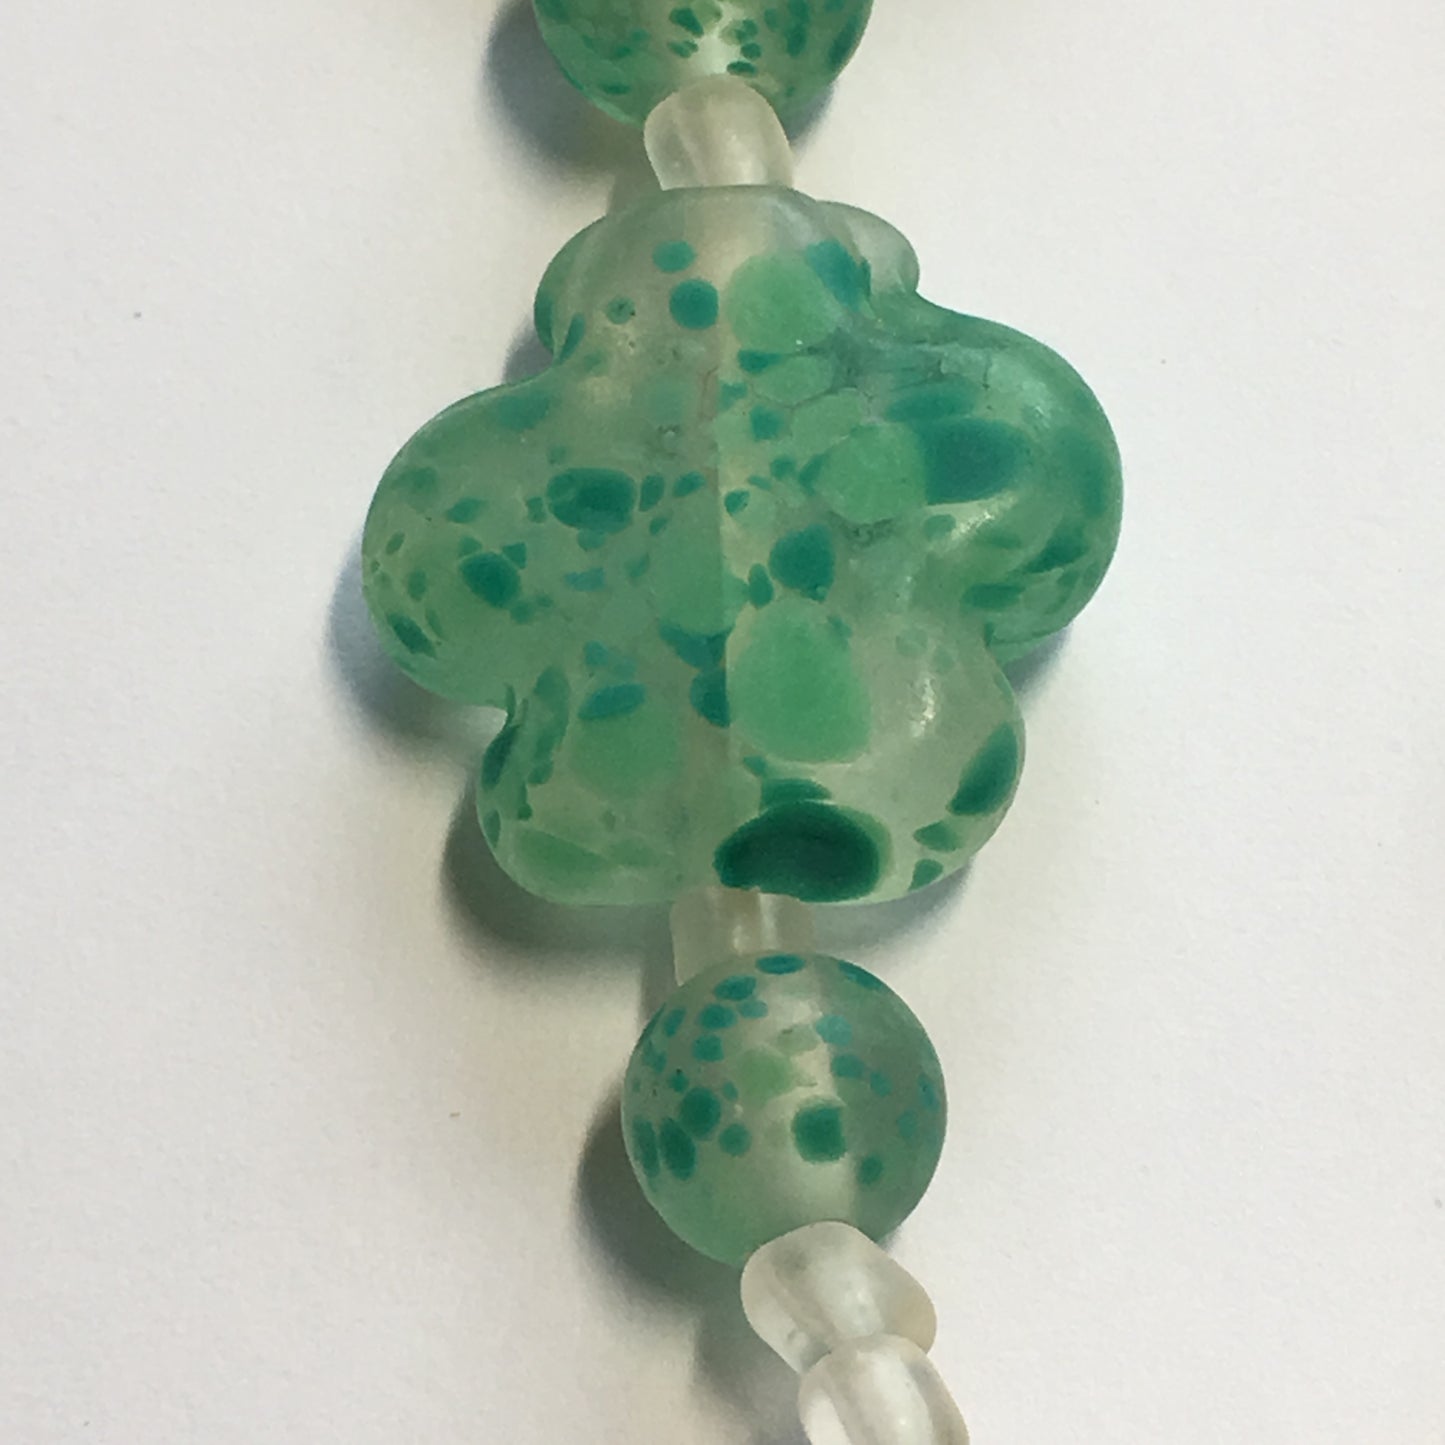 Blue Moon Natural Elegance Speckled Jade Glass Flower Beads, 8-9 mm Rounds, 20 mm Flowers, 14-Inch Strand